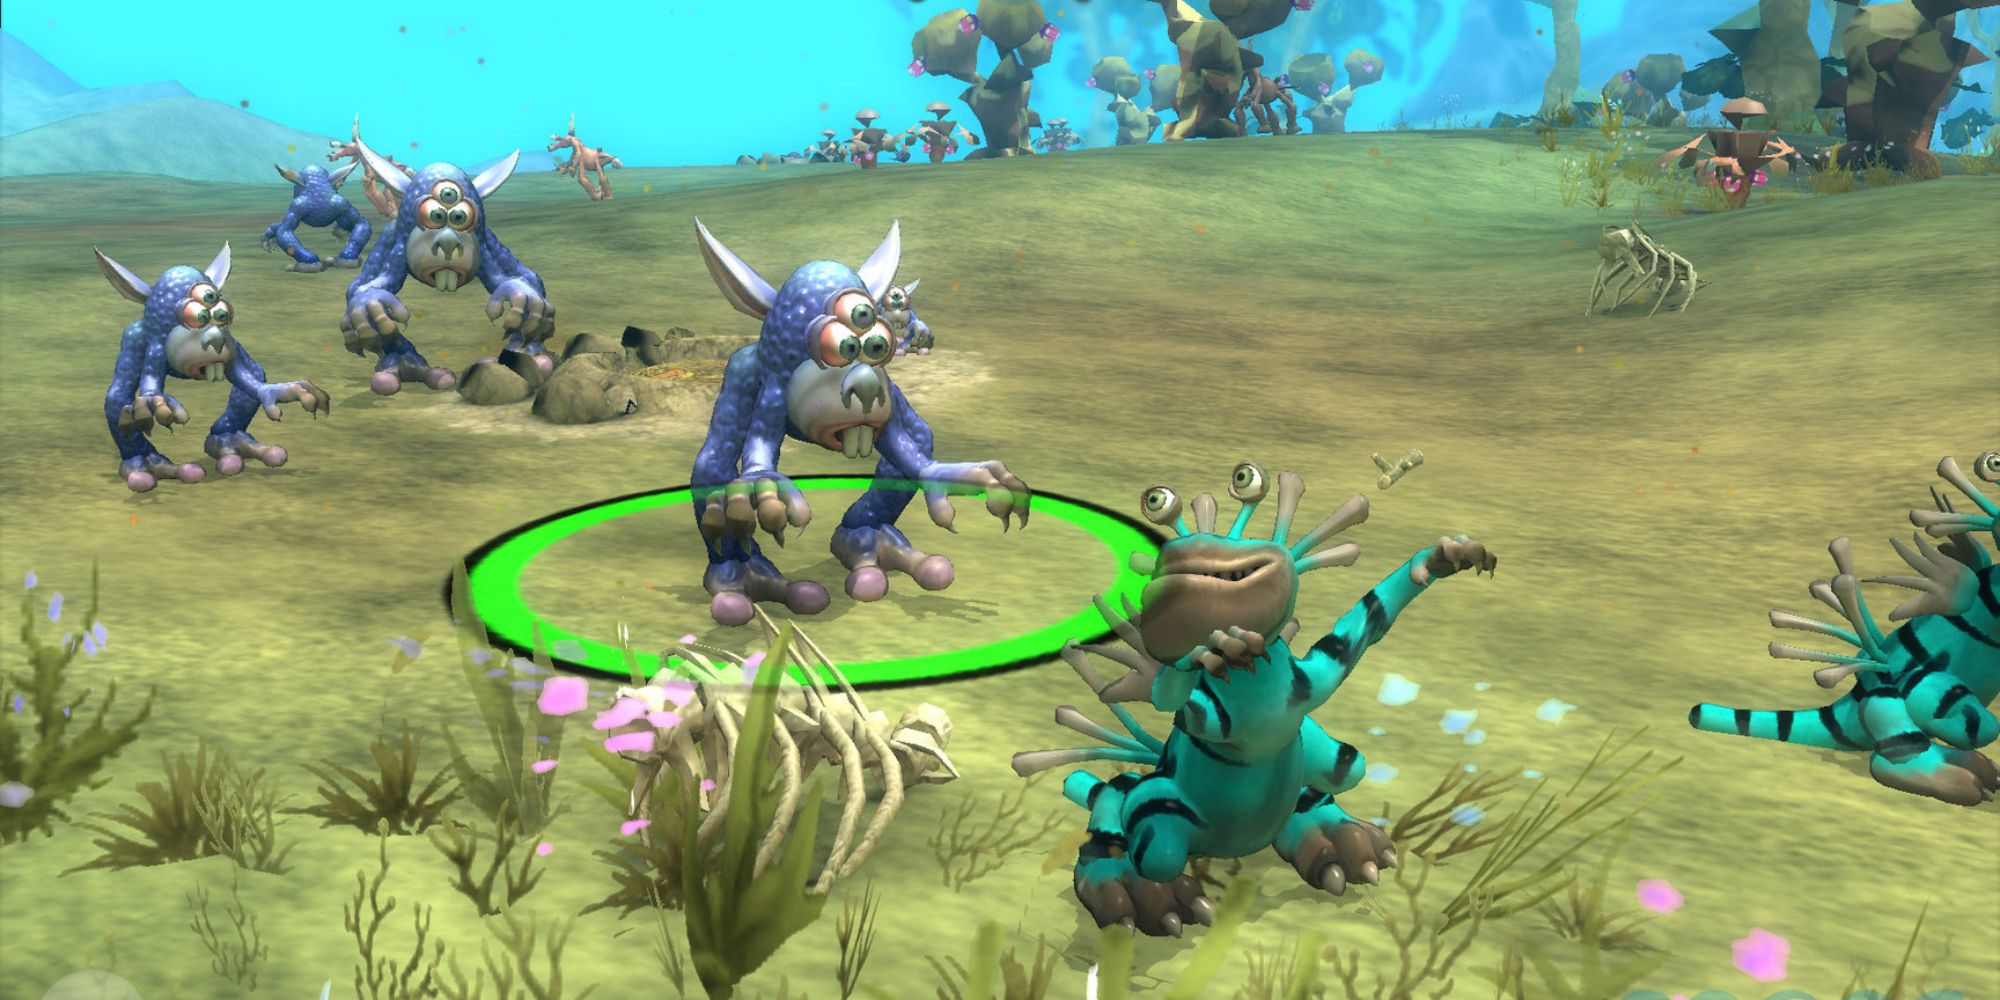 Creatures dancing with each other in the wild in Spore.